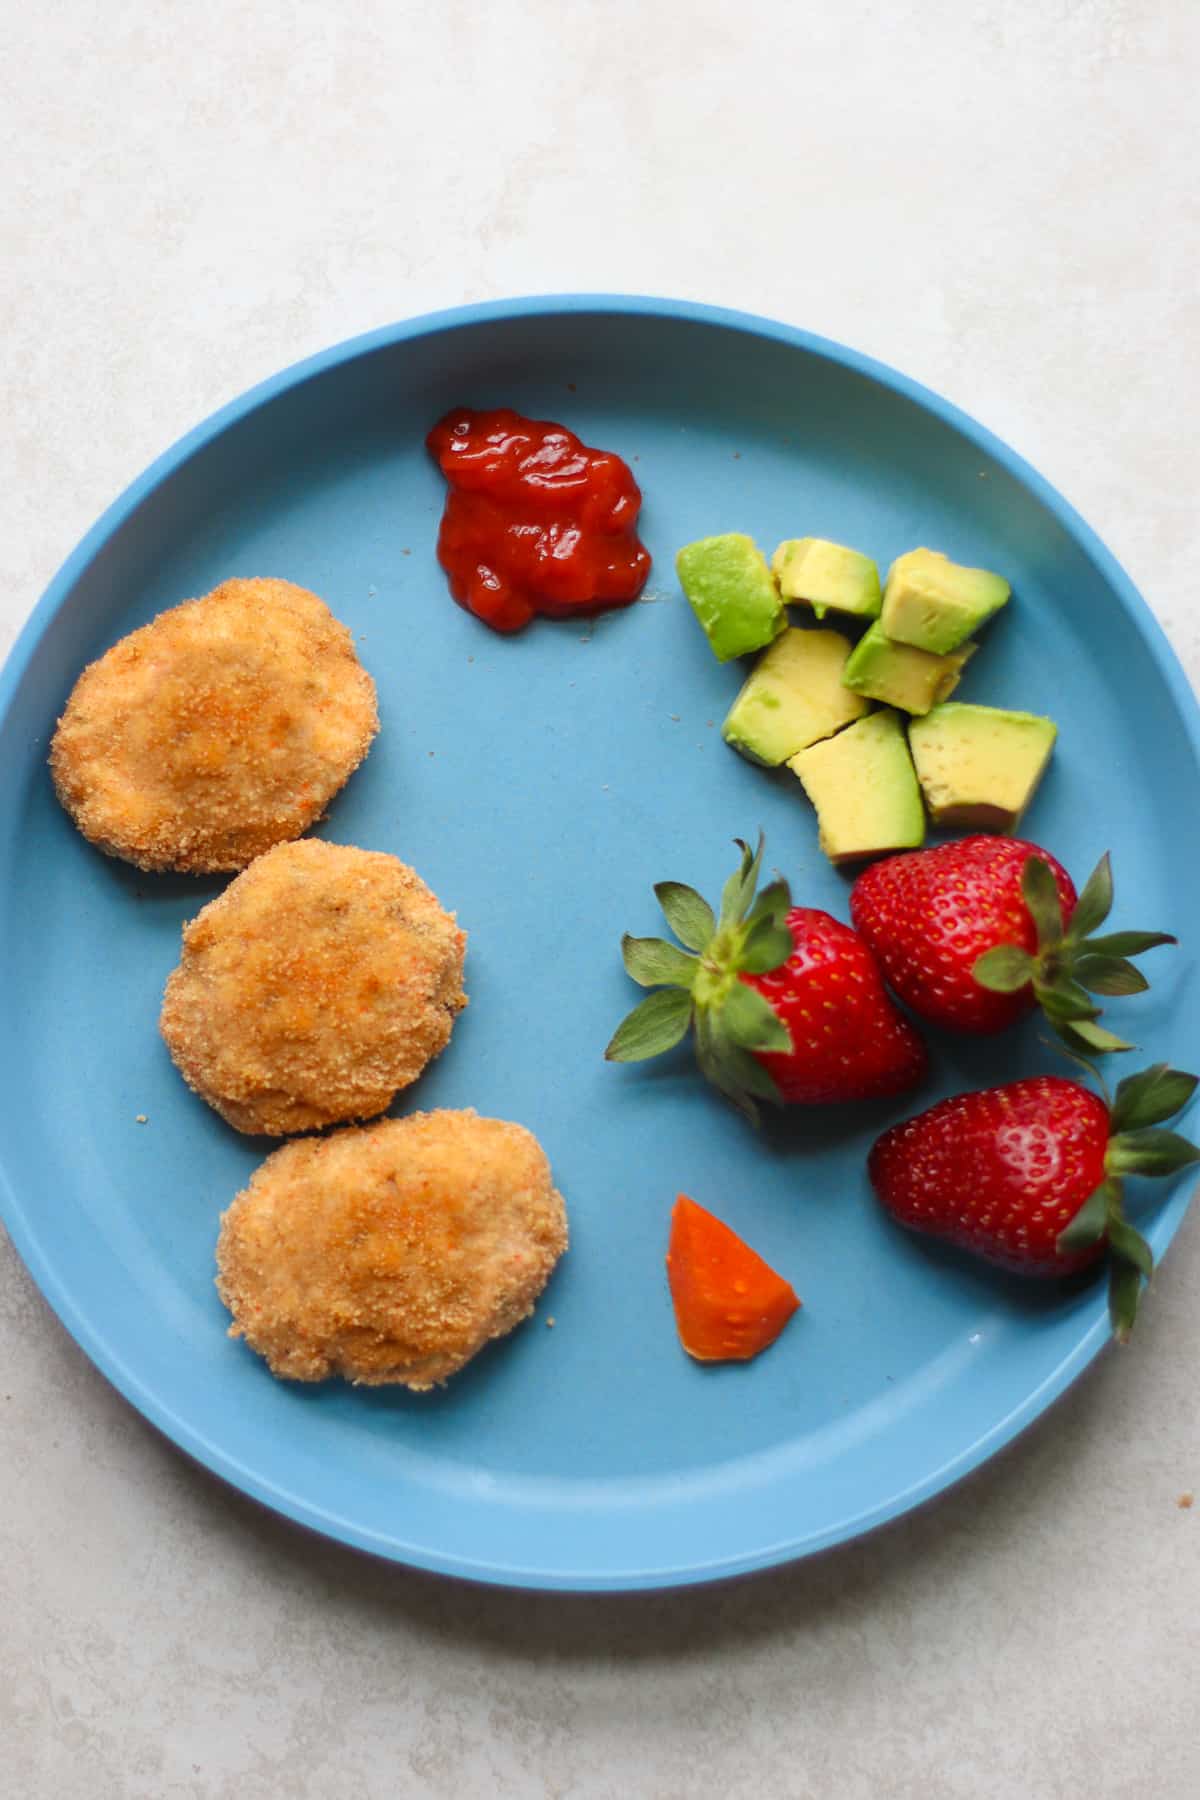 Three nuggets with ketchup, avocado, strawberries, and a tiny piece of carrot.